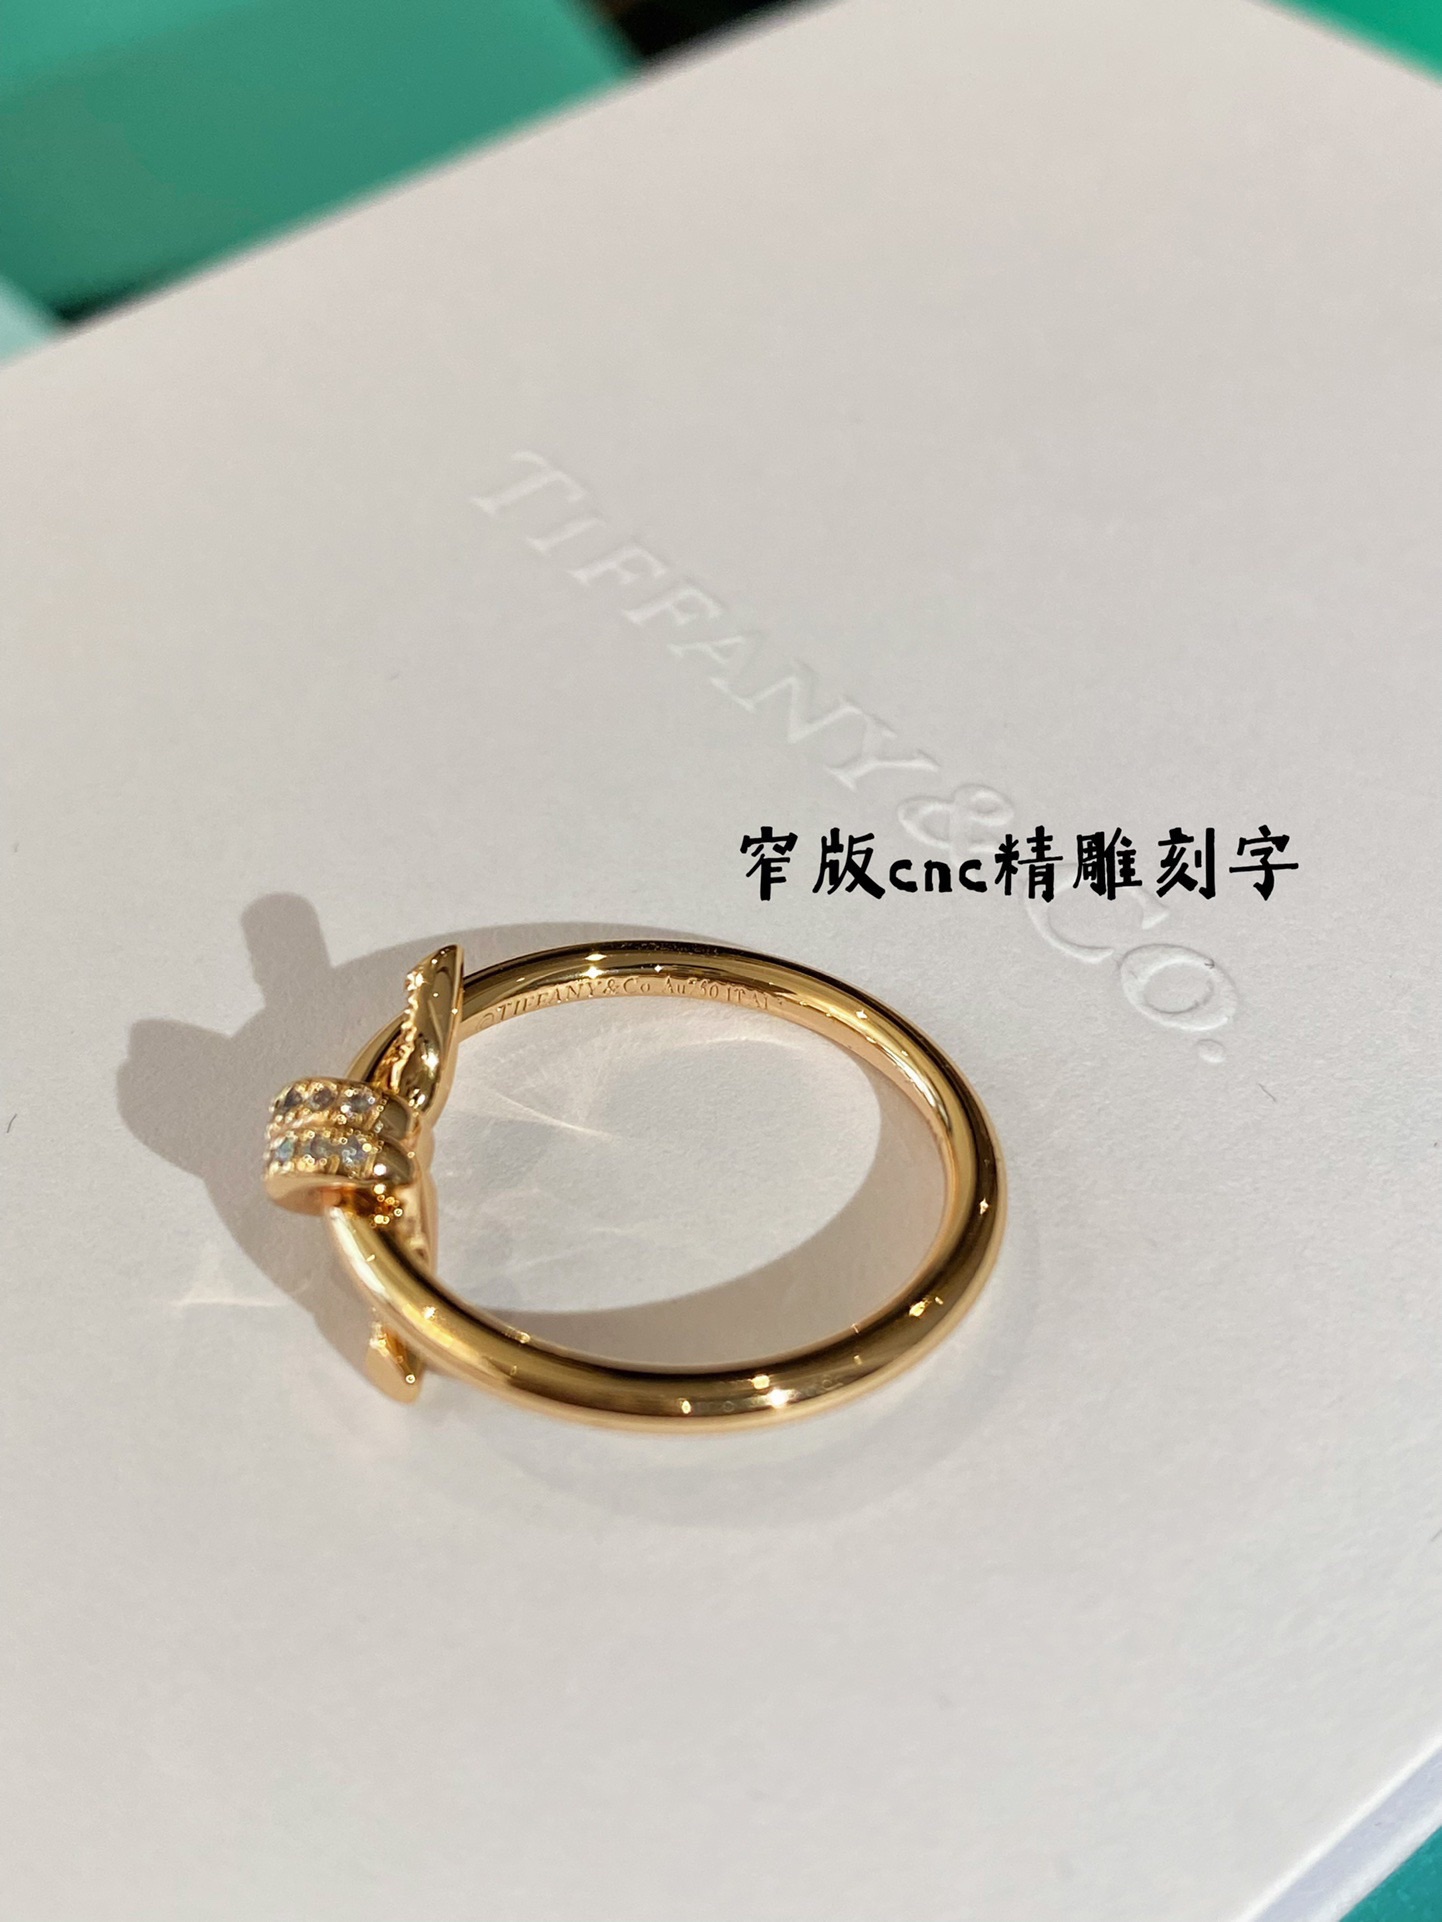 Knot Ring in Yellow Gold with Diamonds